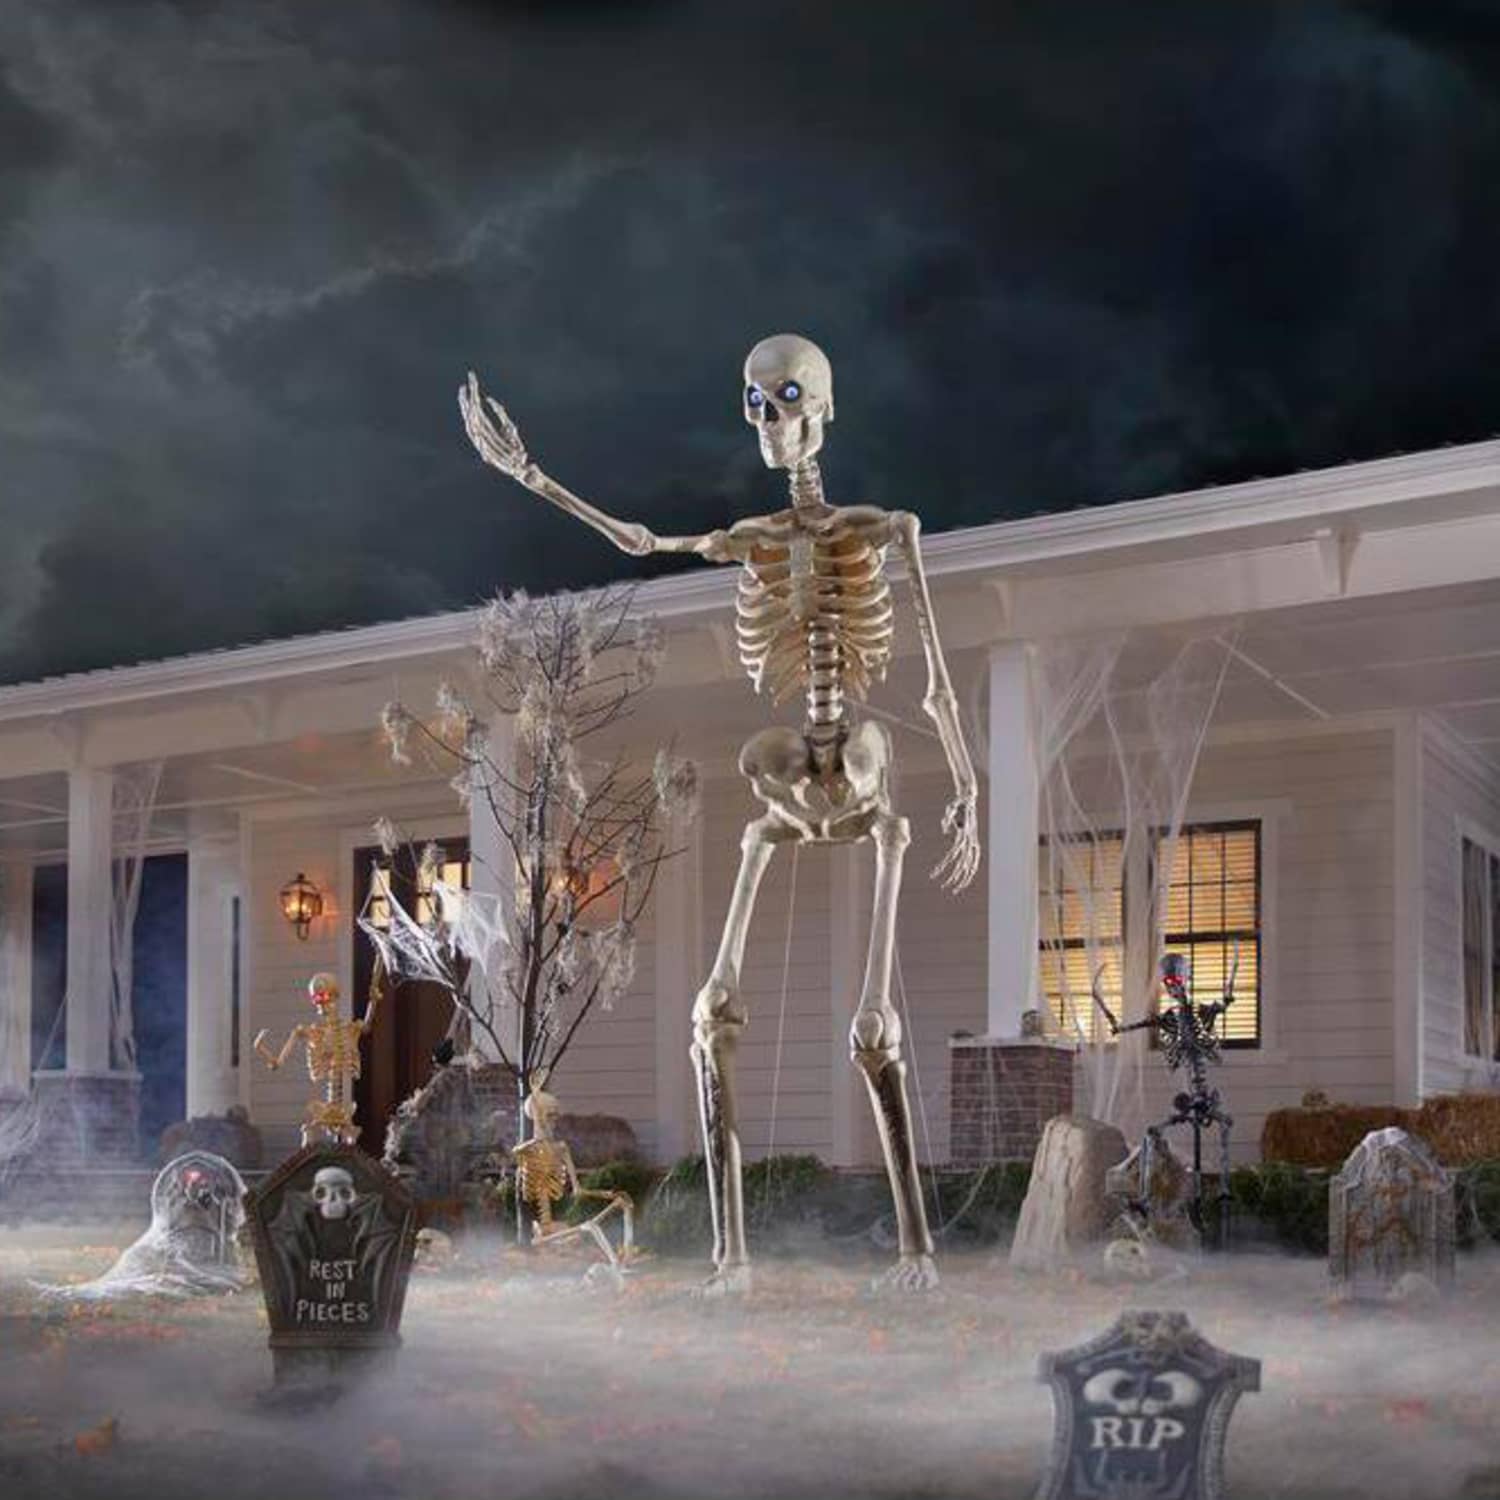 Home Depot\'s 12-Foot-Tall Skeleton Is the Star of Halloween Memes ...